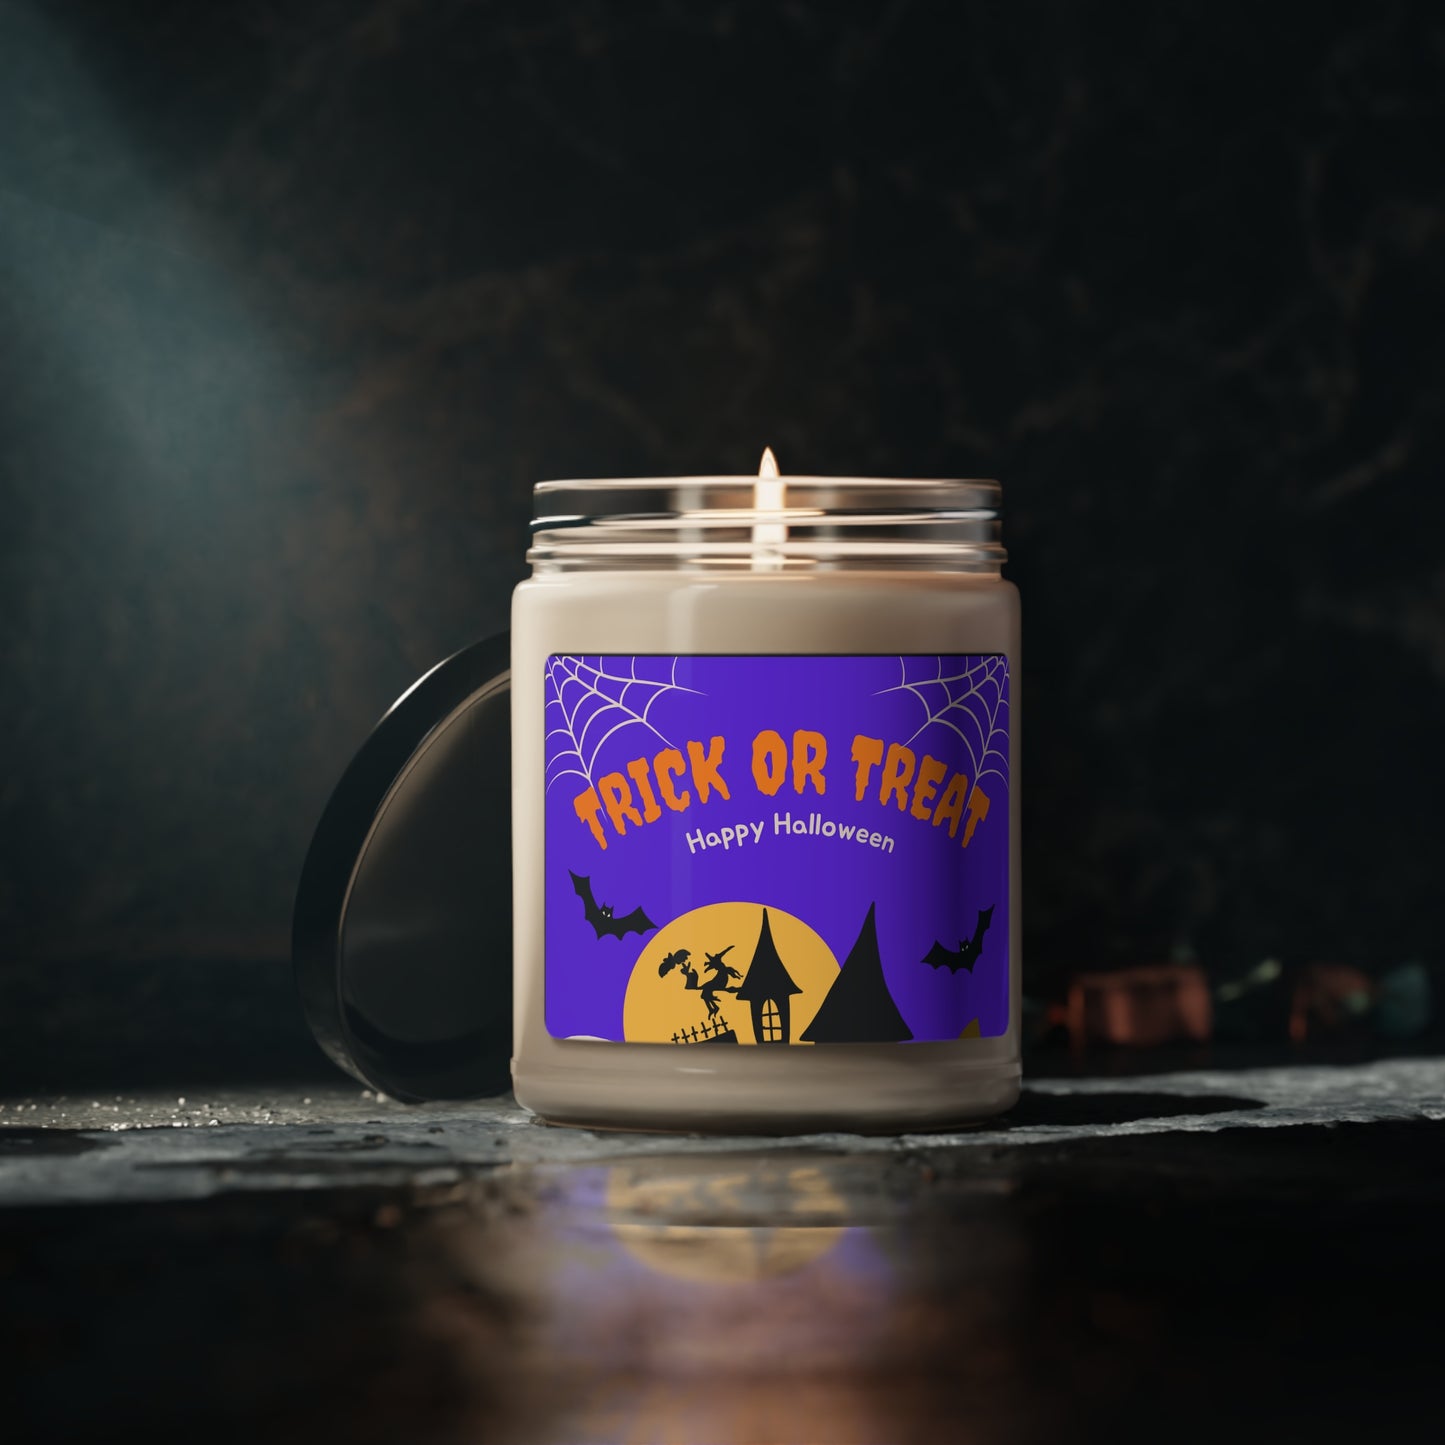 Trick or treat Scented Soy Candle 9oz